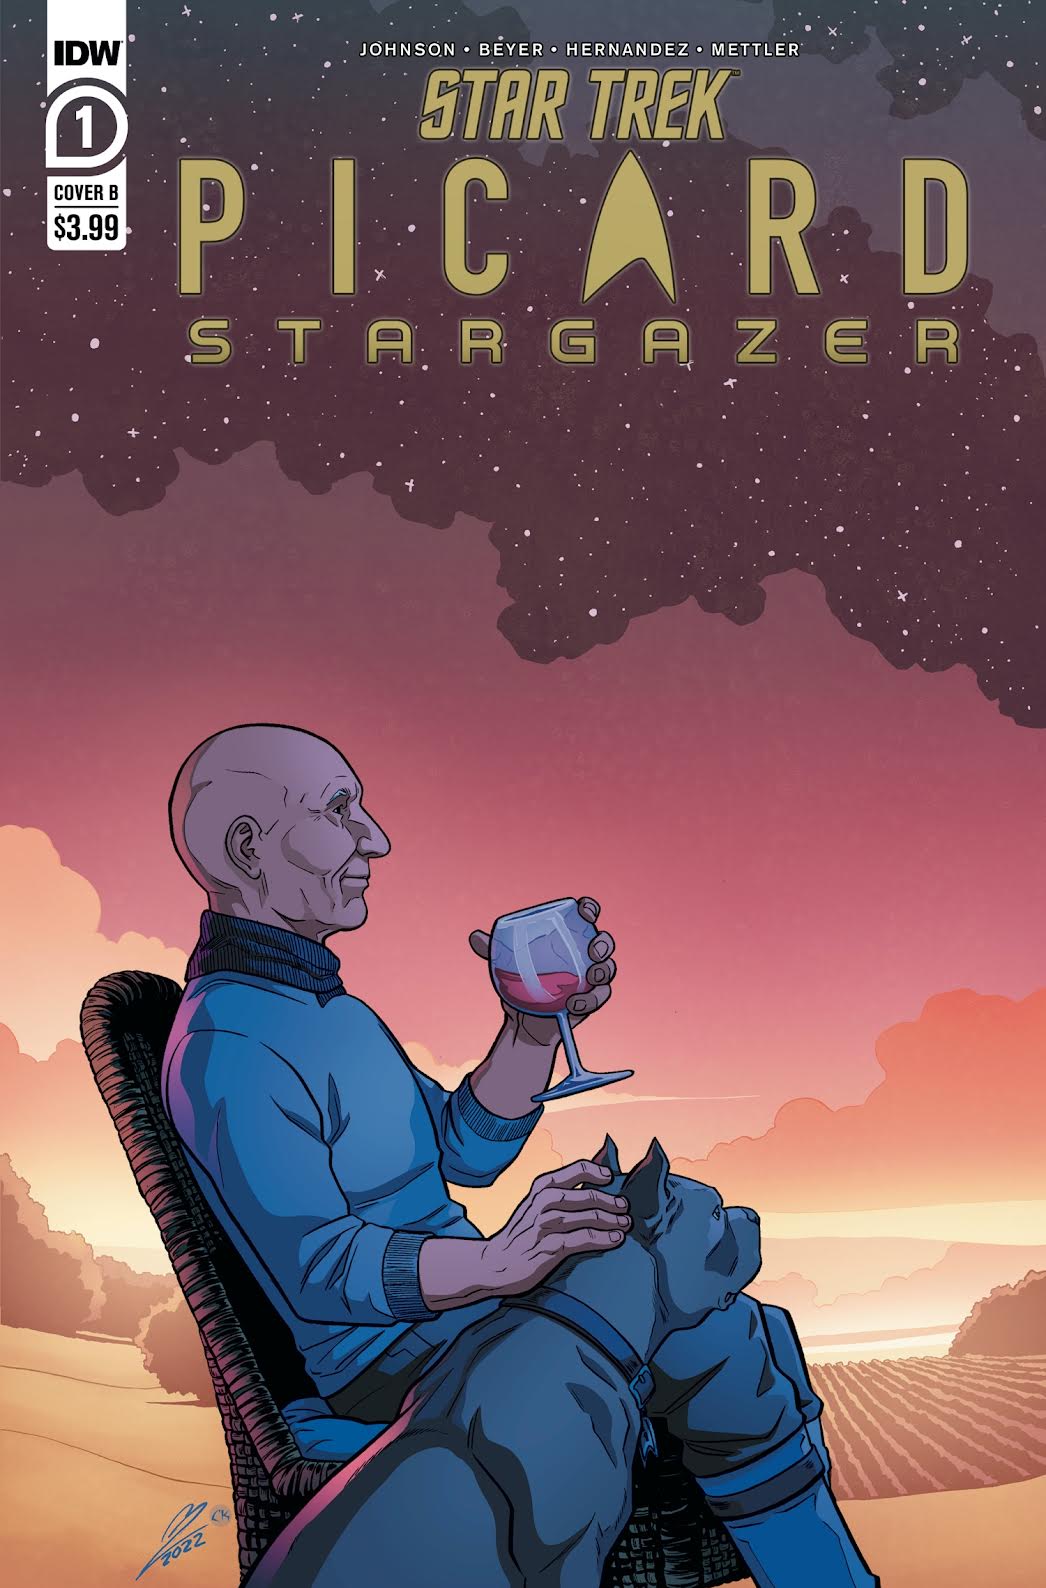 Star Trek's Jean-Luc Picard in a chair sipping wine in an alternate cover for Star Trek: Picard - Stargazer #1.